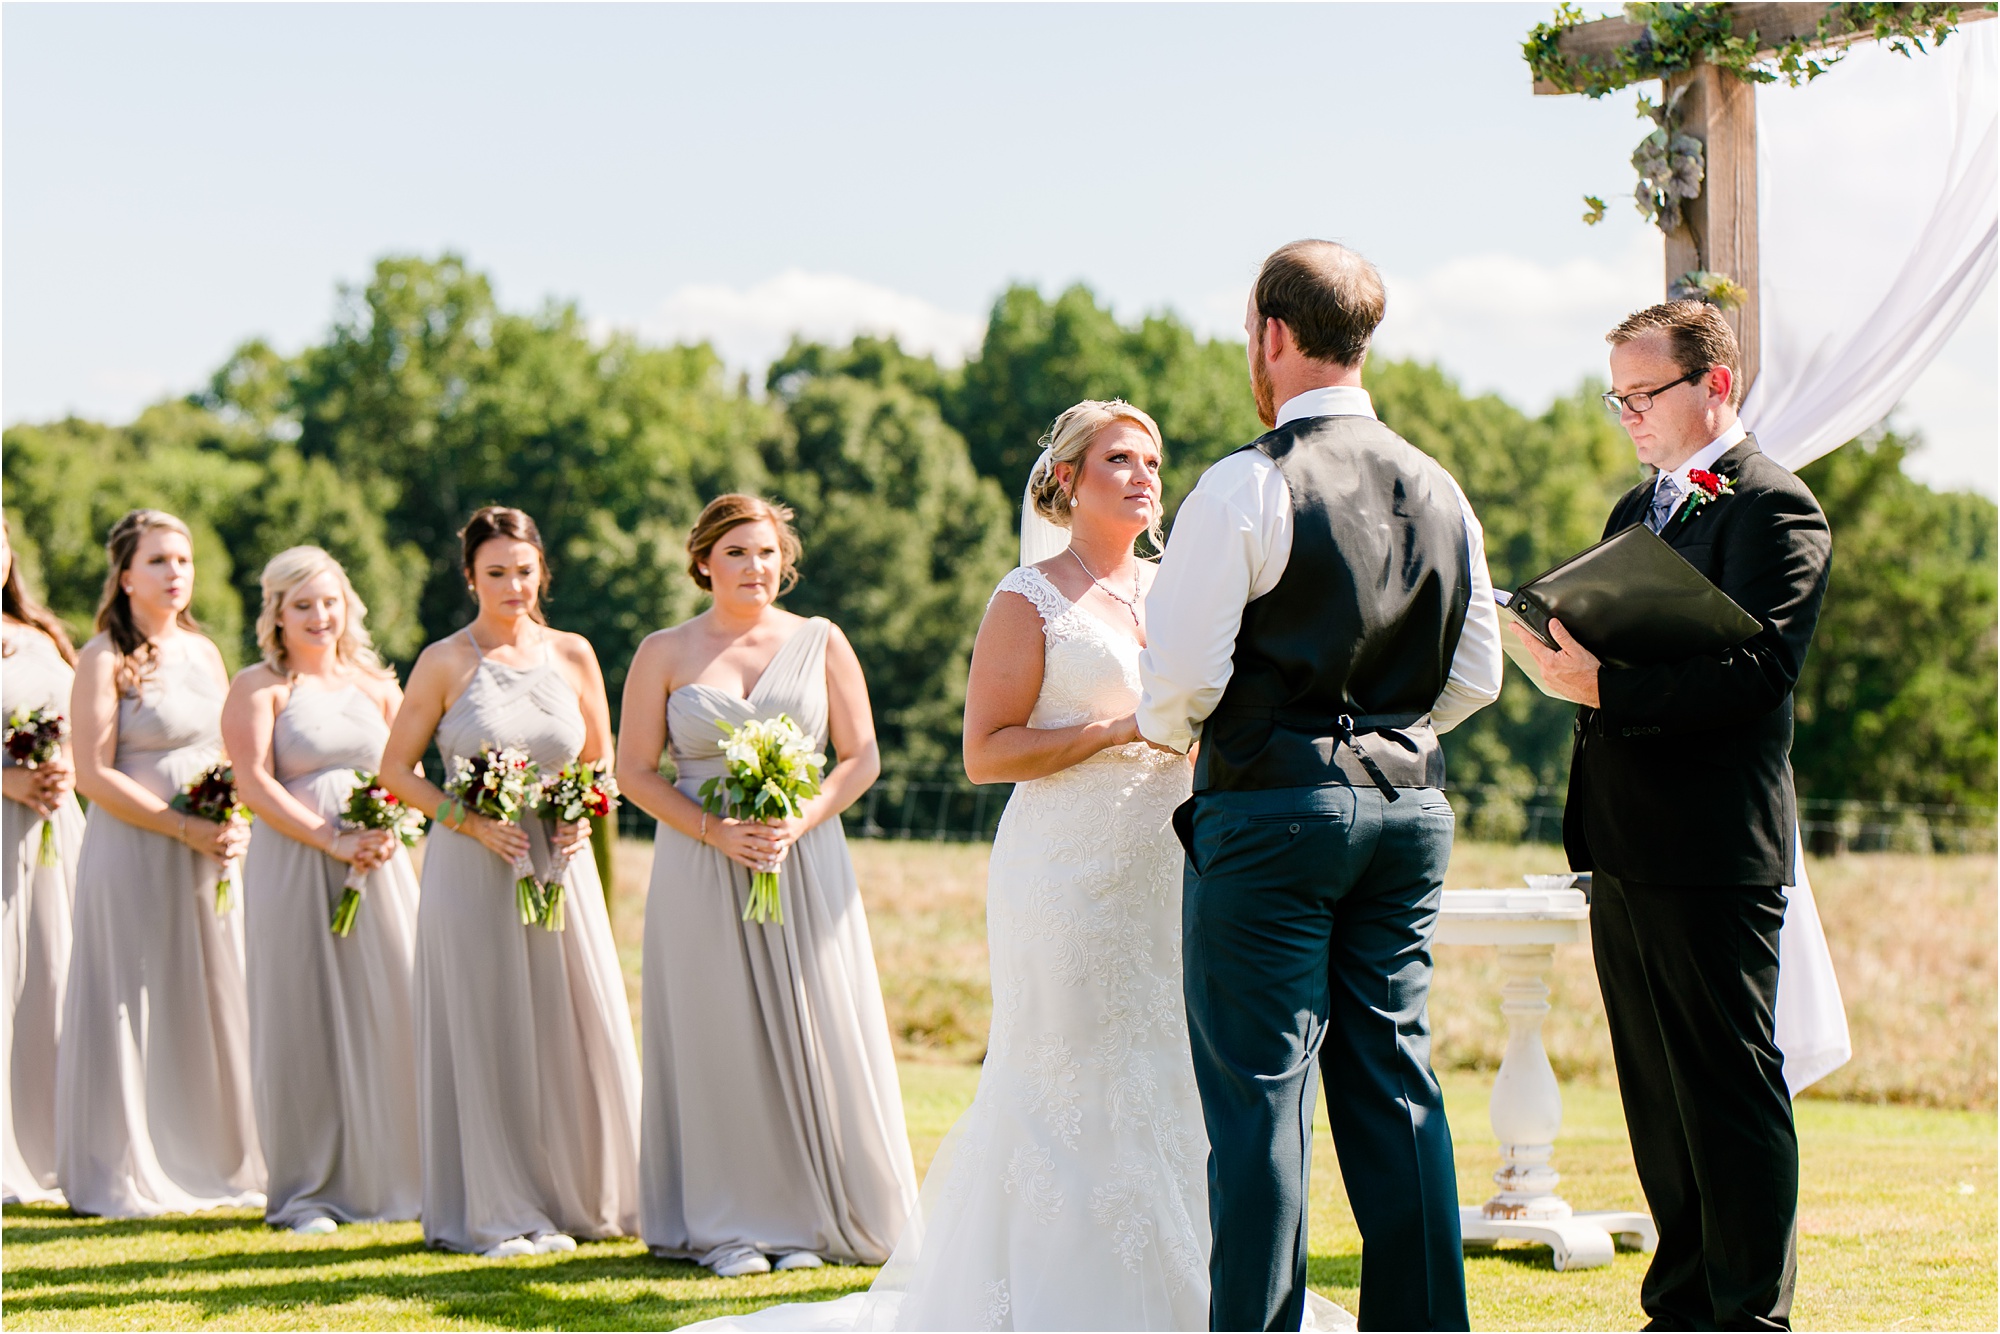 What's the Ideal Ceremony Start Time for a Summer Wedding?